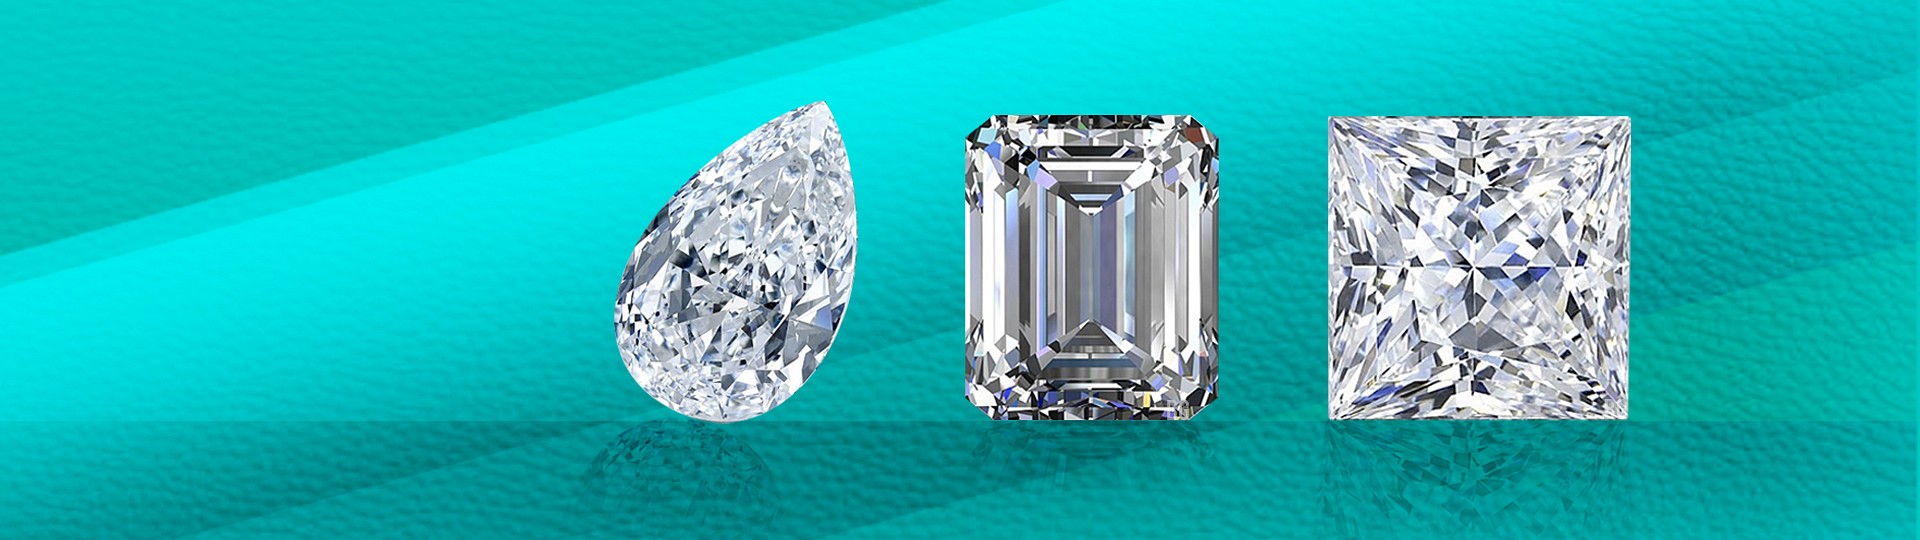 Investment | Rare GIA Natural Diamonds| Day 1 by Bid Global International Auctioneers LLC